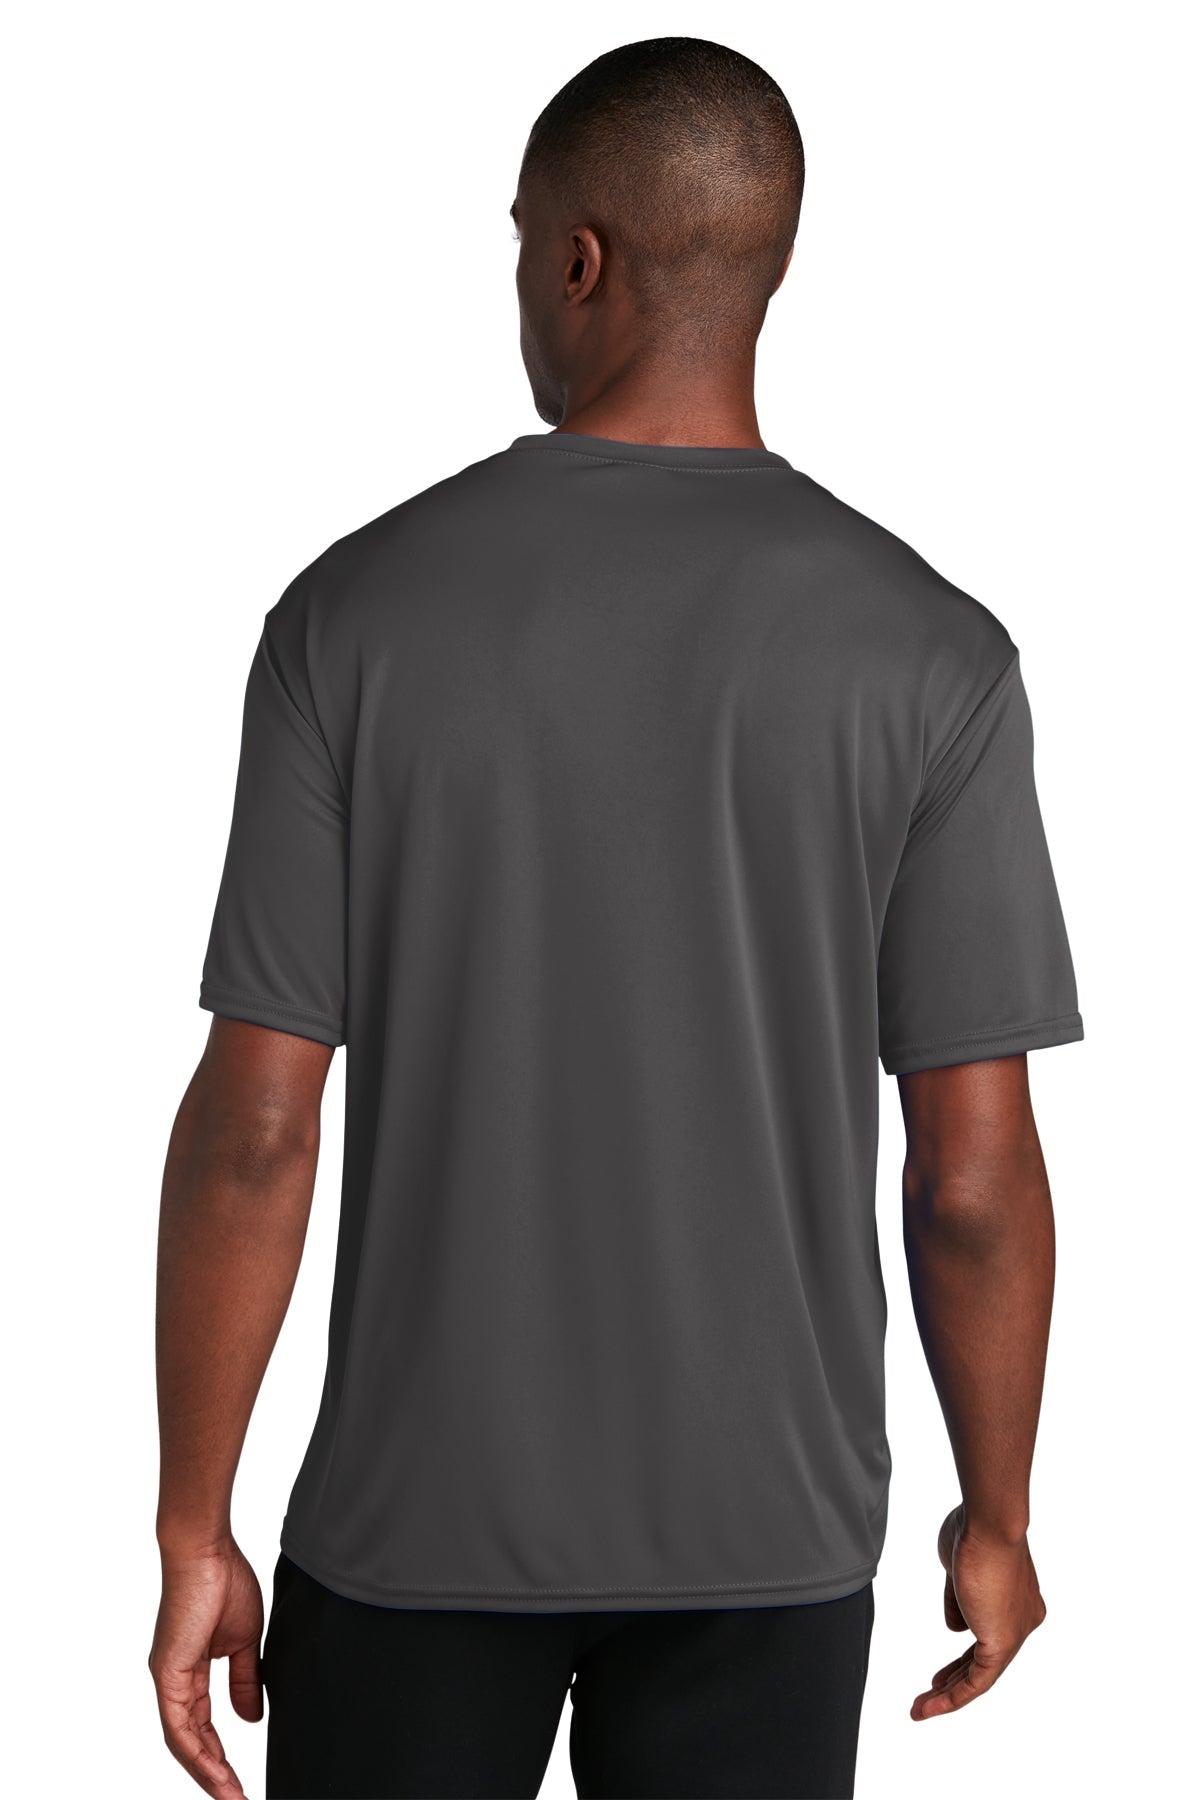 Port & Company Performance Branded Tee's, Charcoal